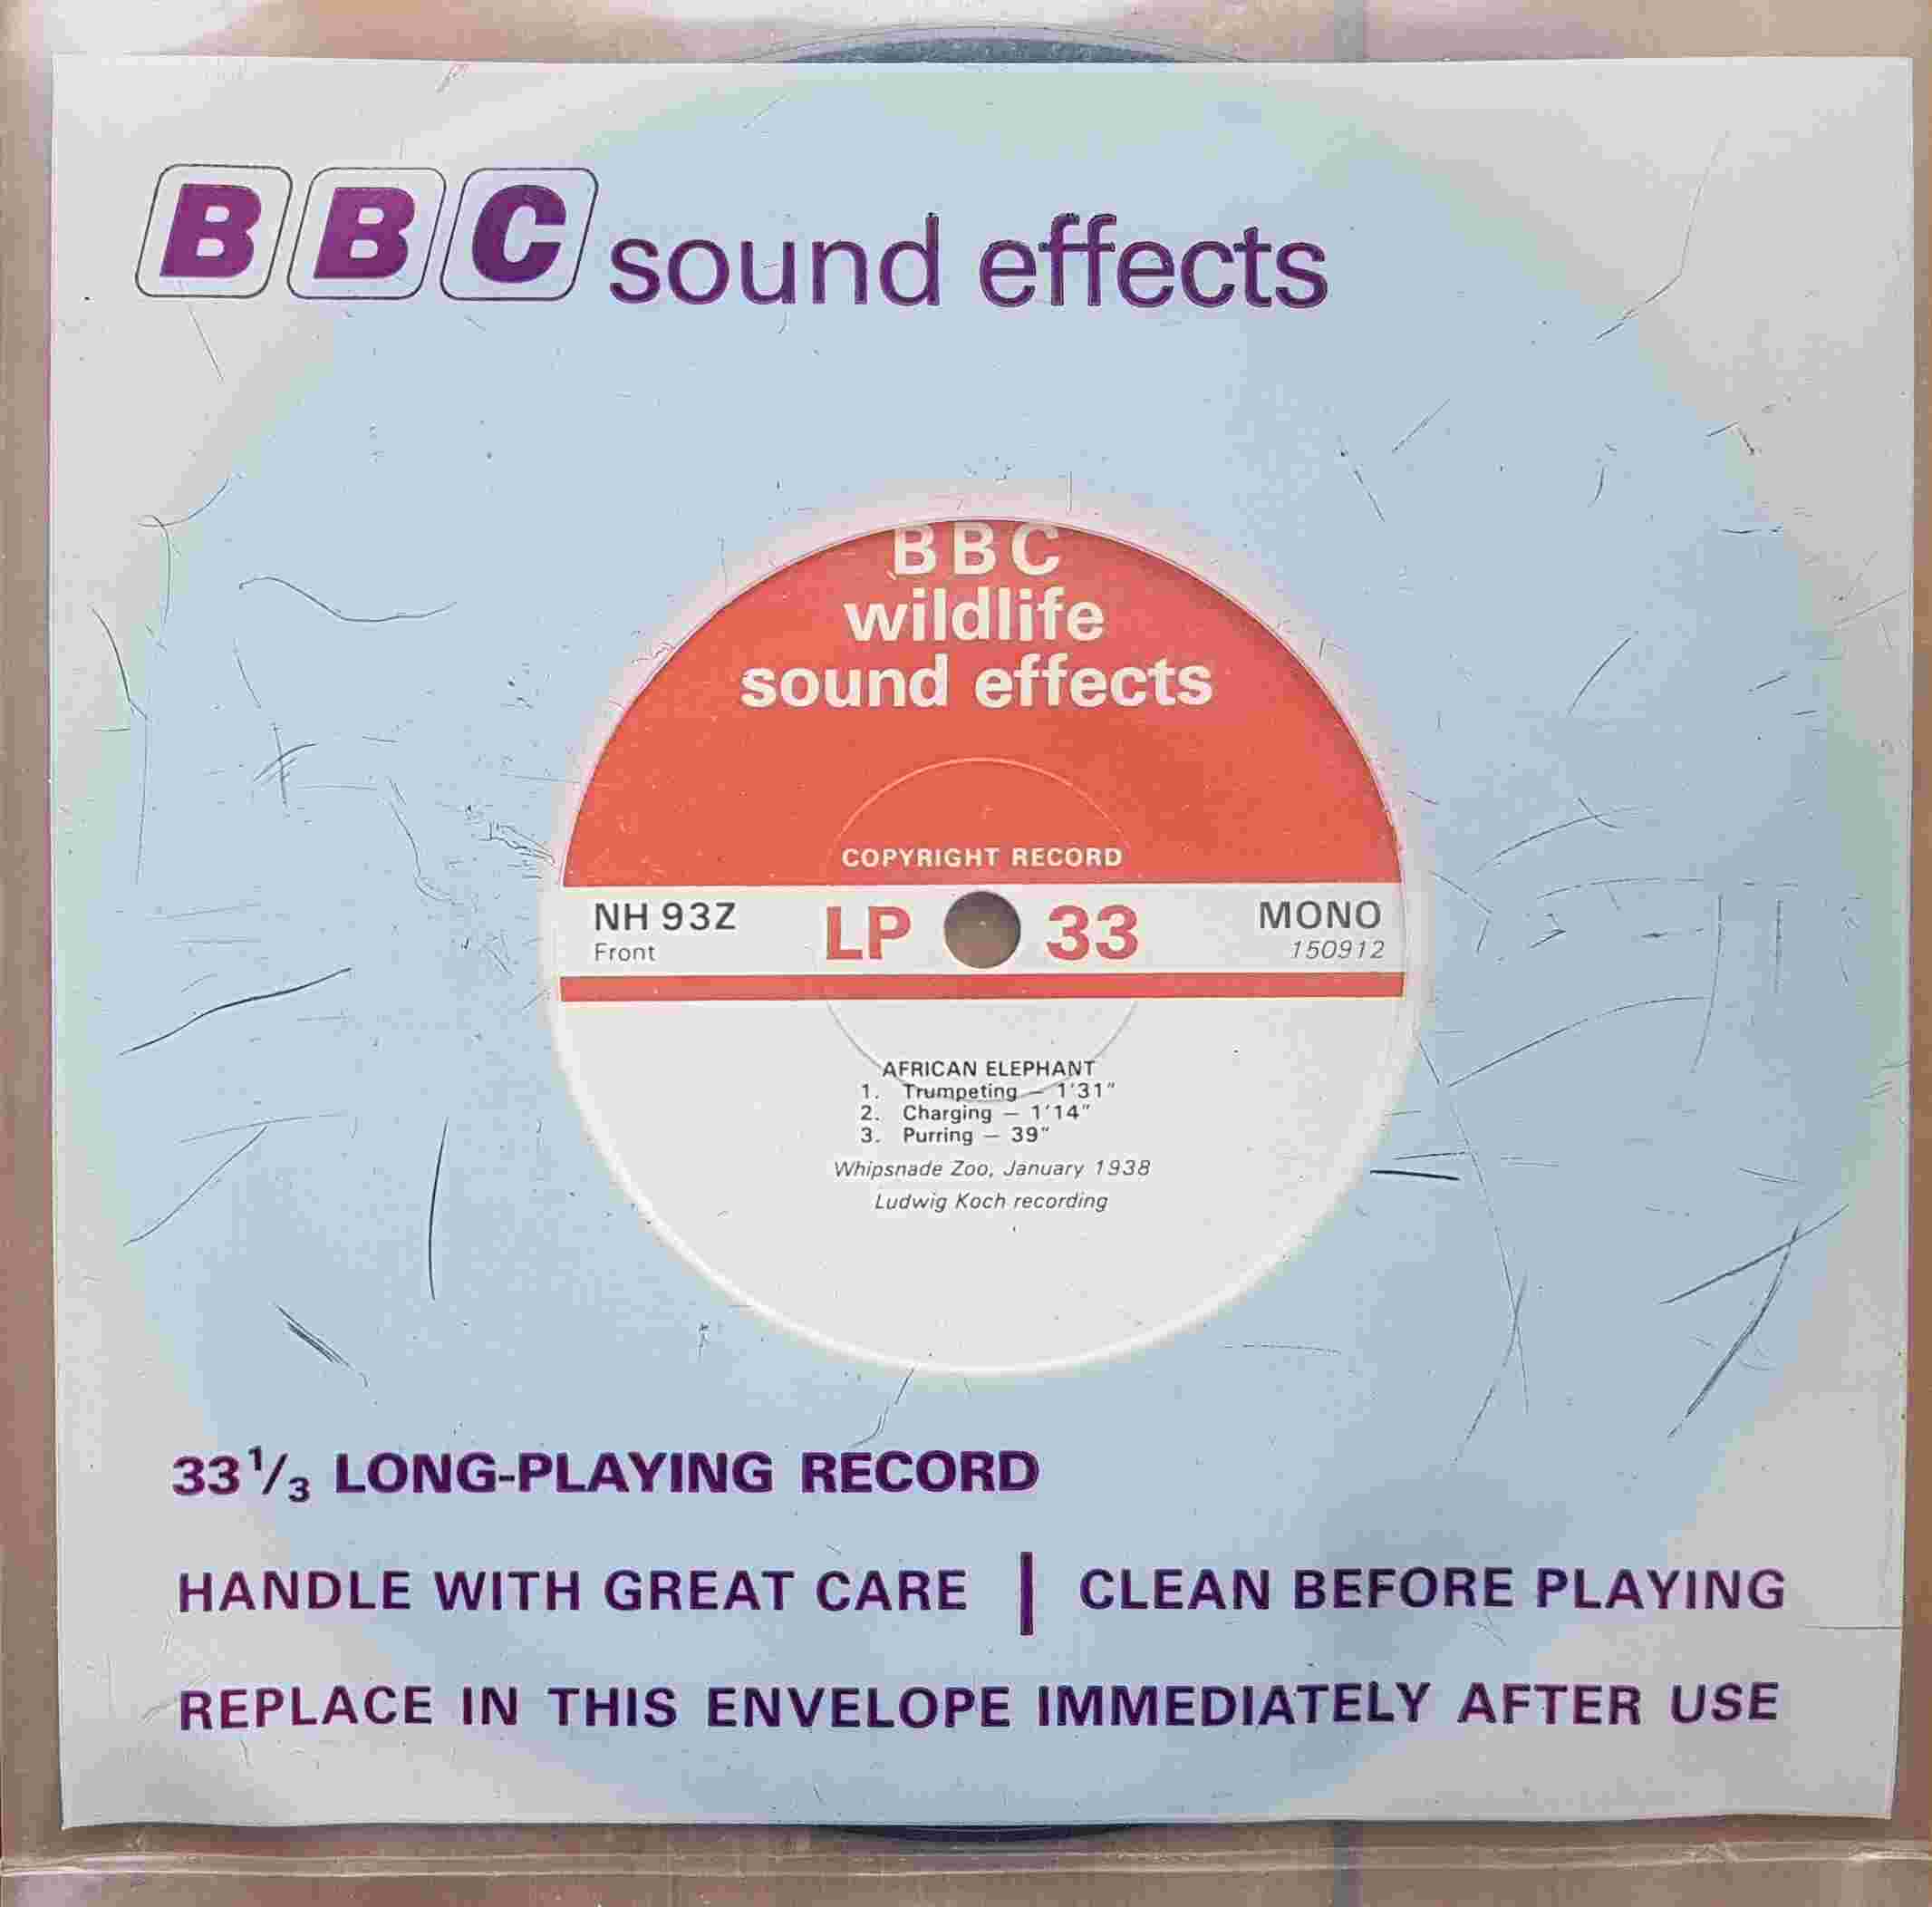 Picture of NH 93Z American elephant / Chimpanzee / Concolor Gibbon / Agile Gibbon by artist Not registered from the BBC singles - Records and Tapes library